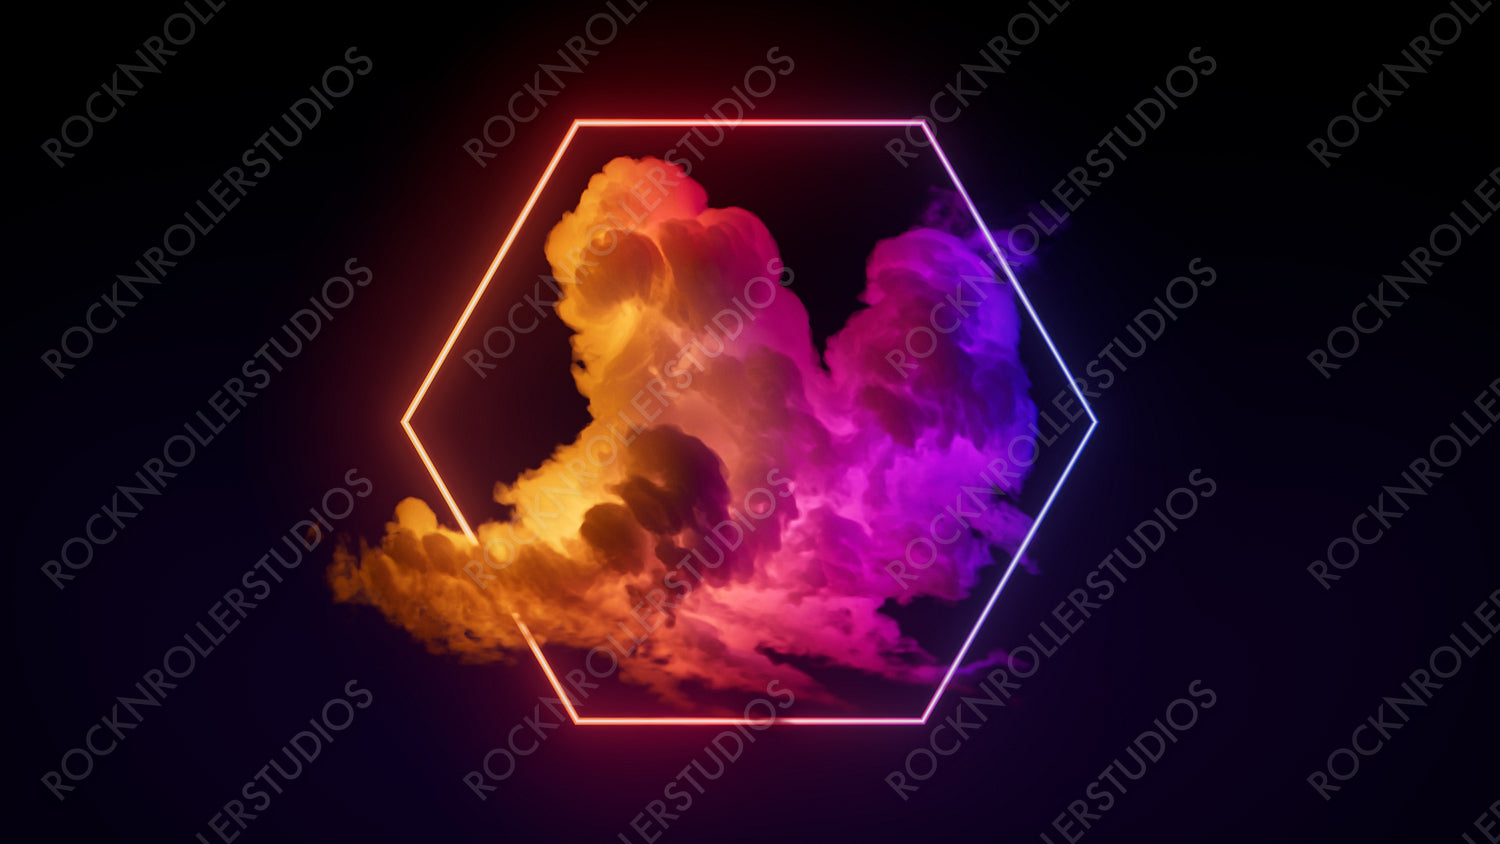 Cloud Formation Illuminated with Pink and Yellow Fluorescent Light. Dark Environment with Hexagon shaped Neon Frame.